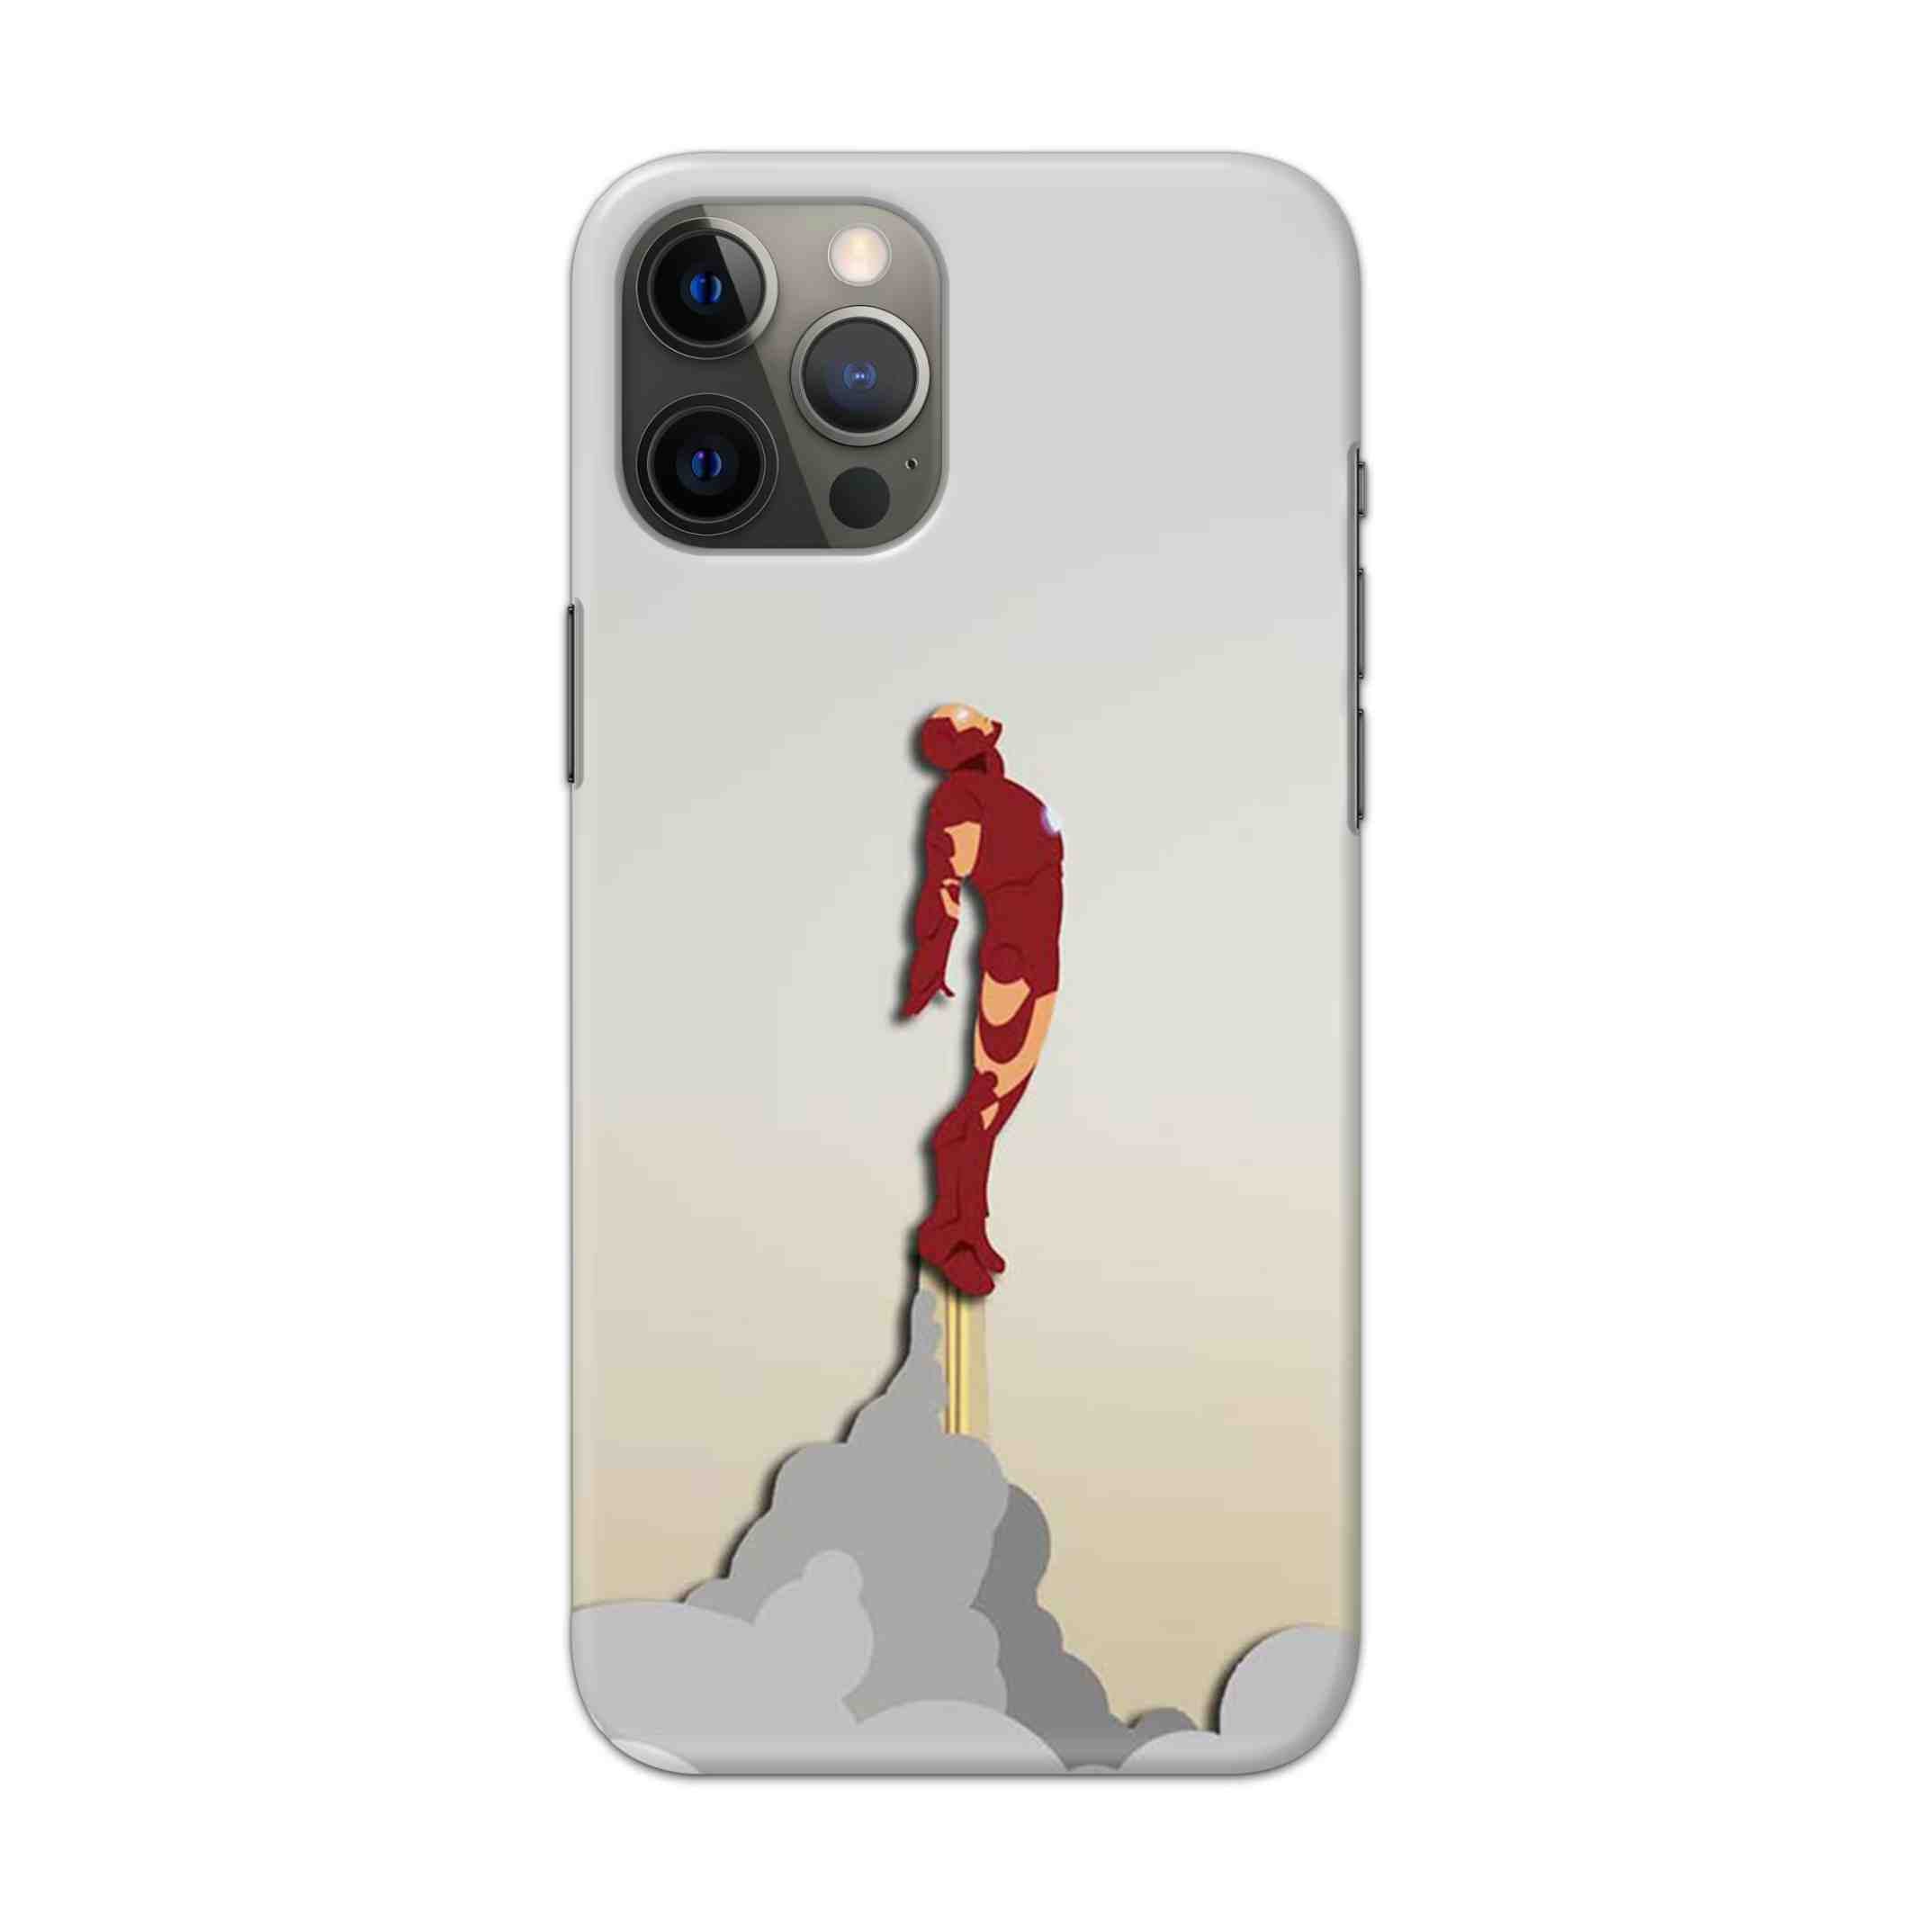 Buy Flying Ironman Hard Back Mobile Phone Case Cover For Apple iPhone 12 pro max Online